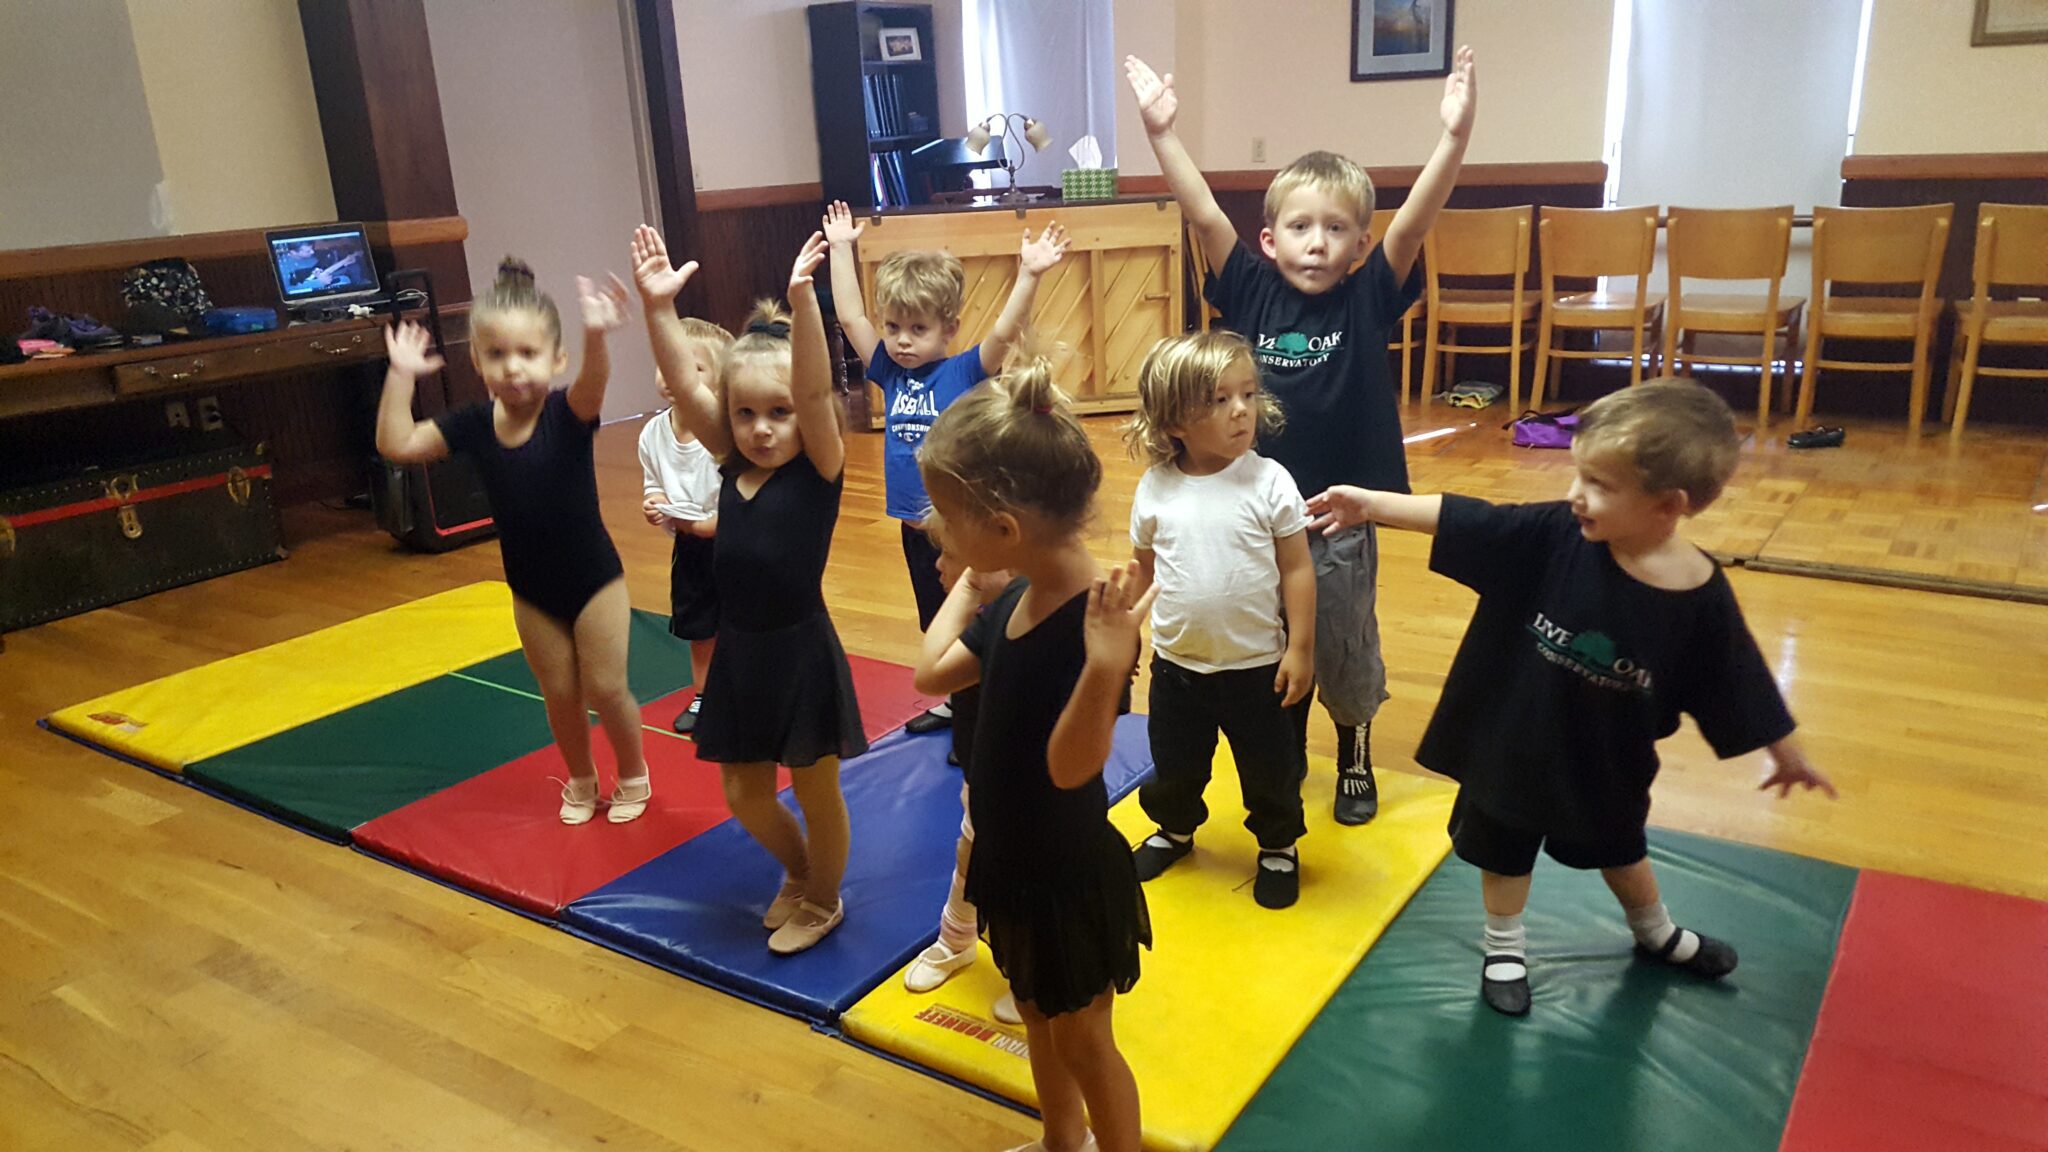 Live Oak theatre has openings in a special dance class for two and three-year-old boys and girls. Please note that the Conservatory limits class sizes to adhere to social distancing guidelines.